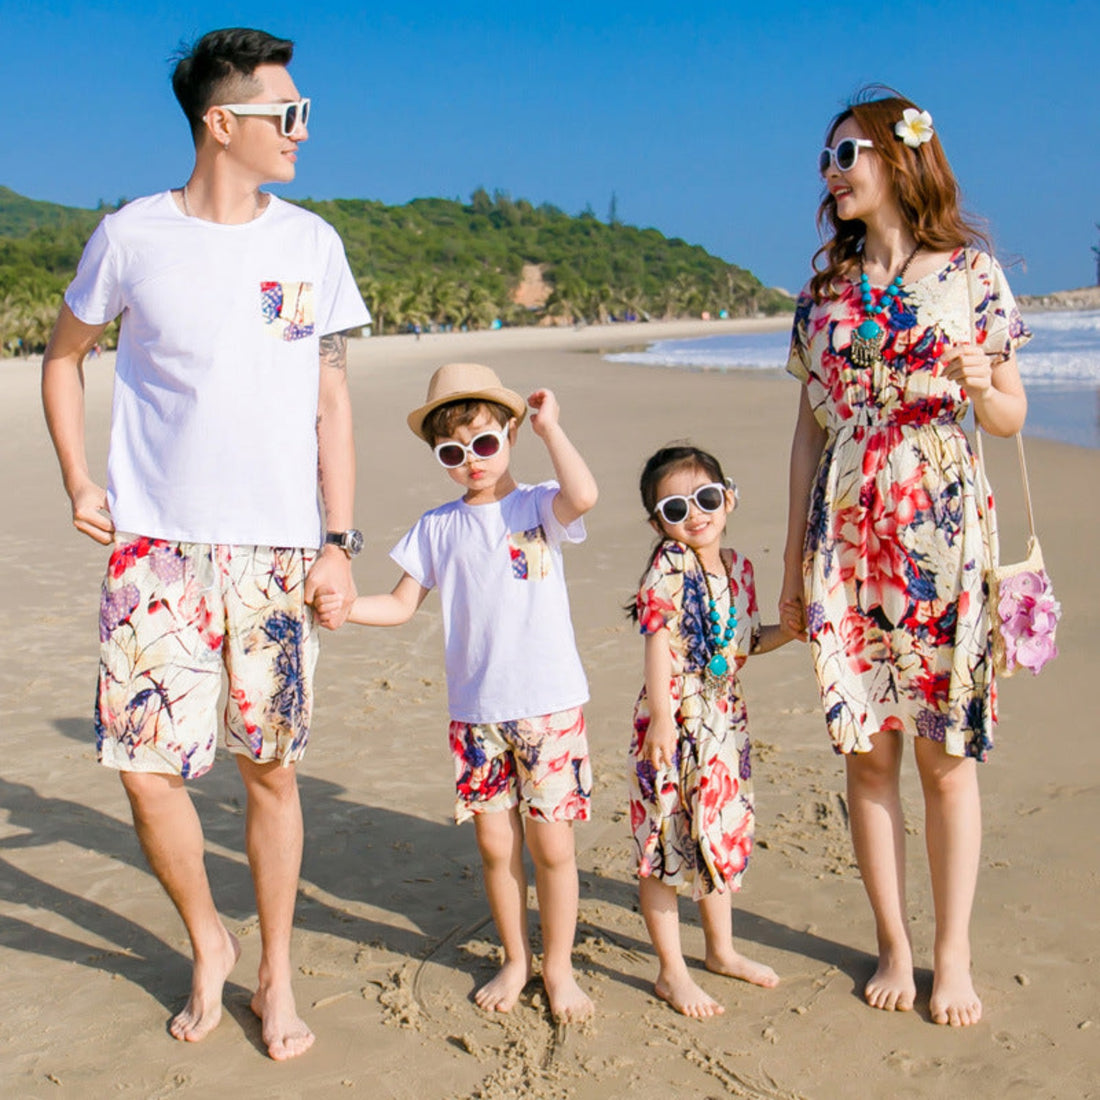 Family of four wearing matching outfits in a beach